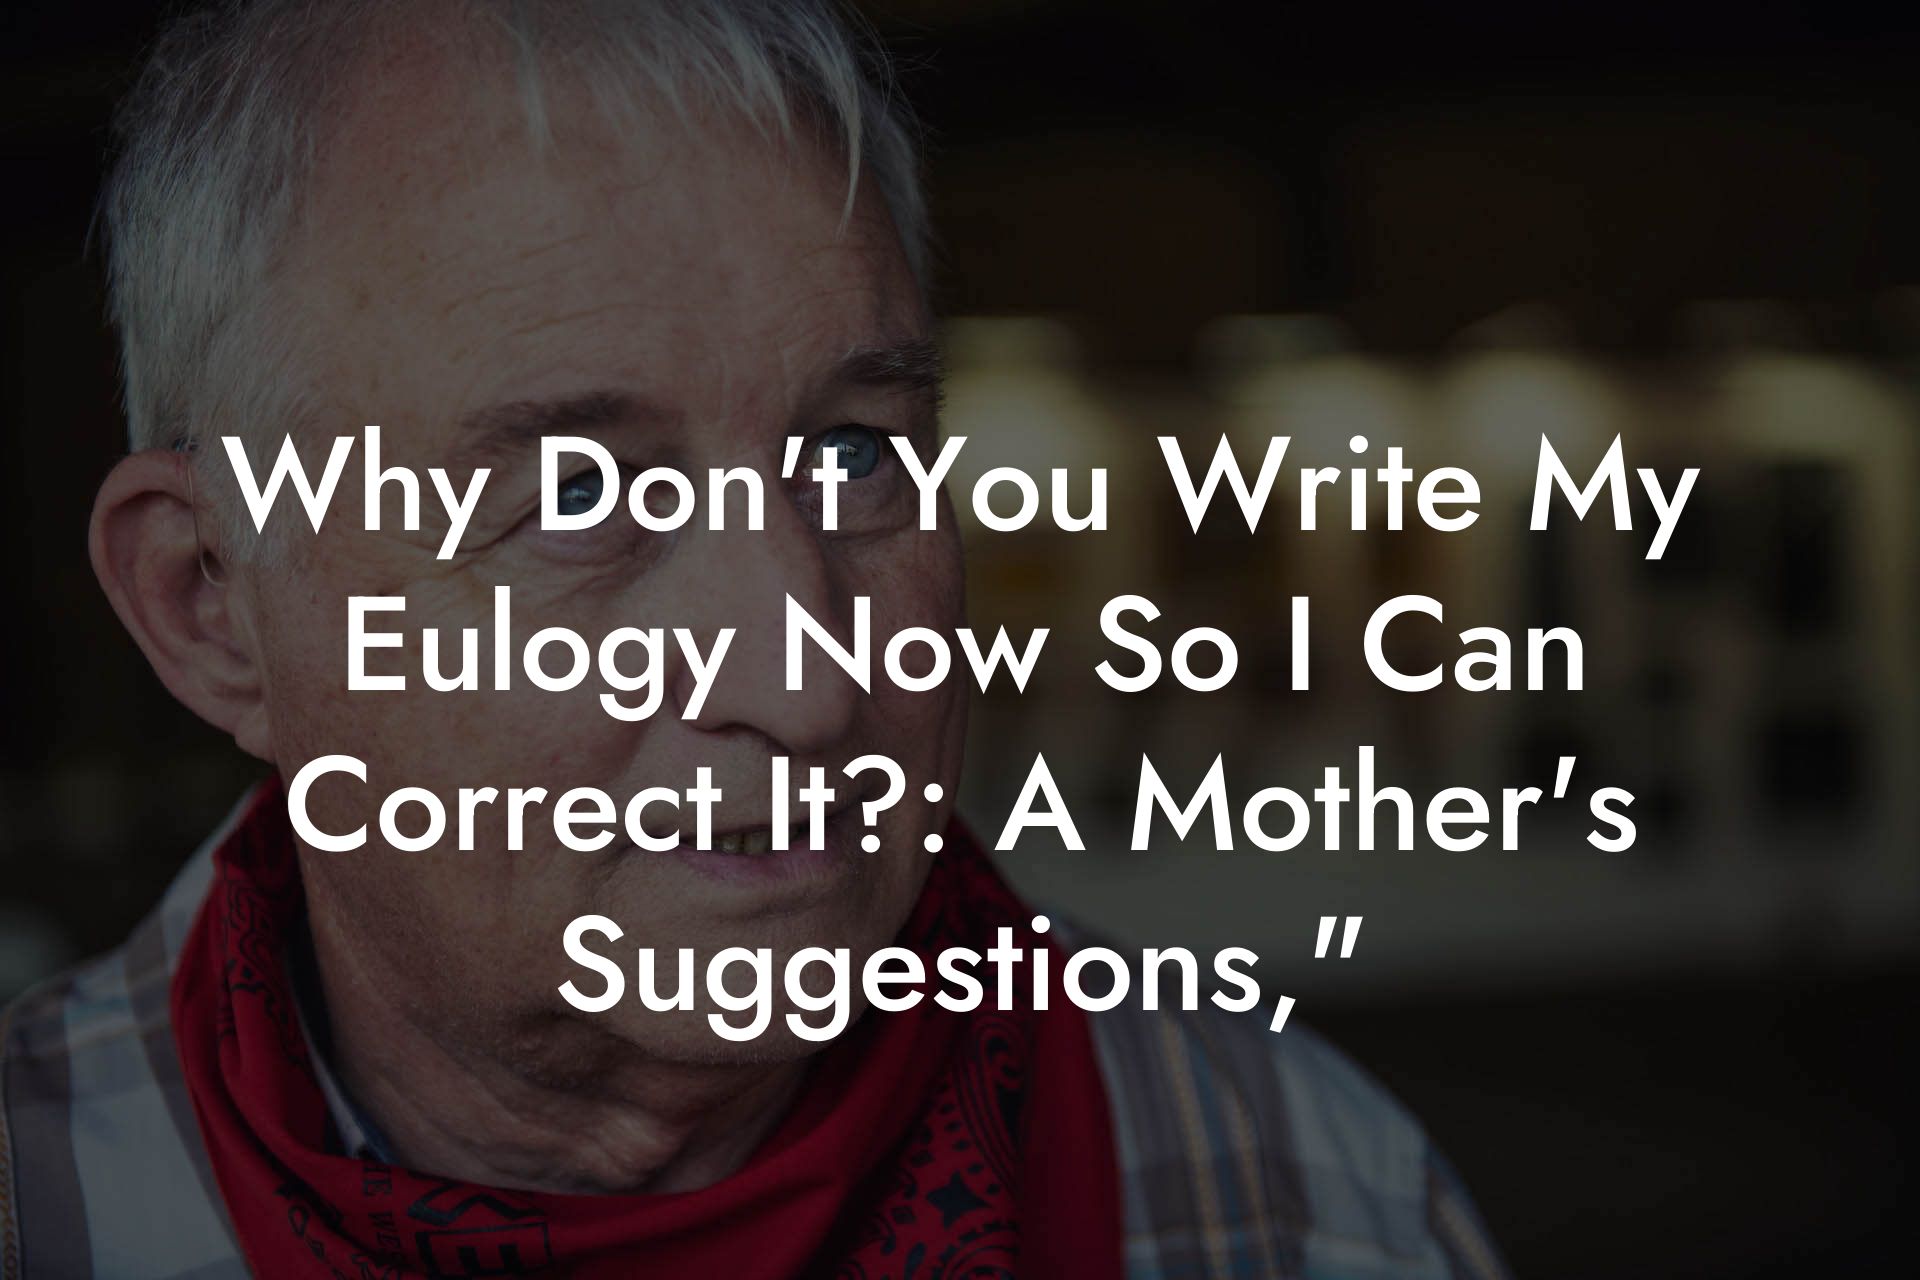 Why Don't You Write My Eulogy Now So I Can Correct It?: A Mother's Suggestions,"